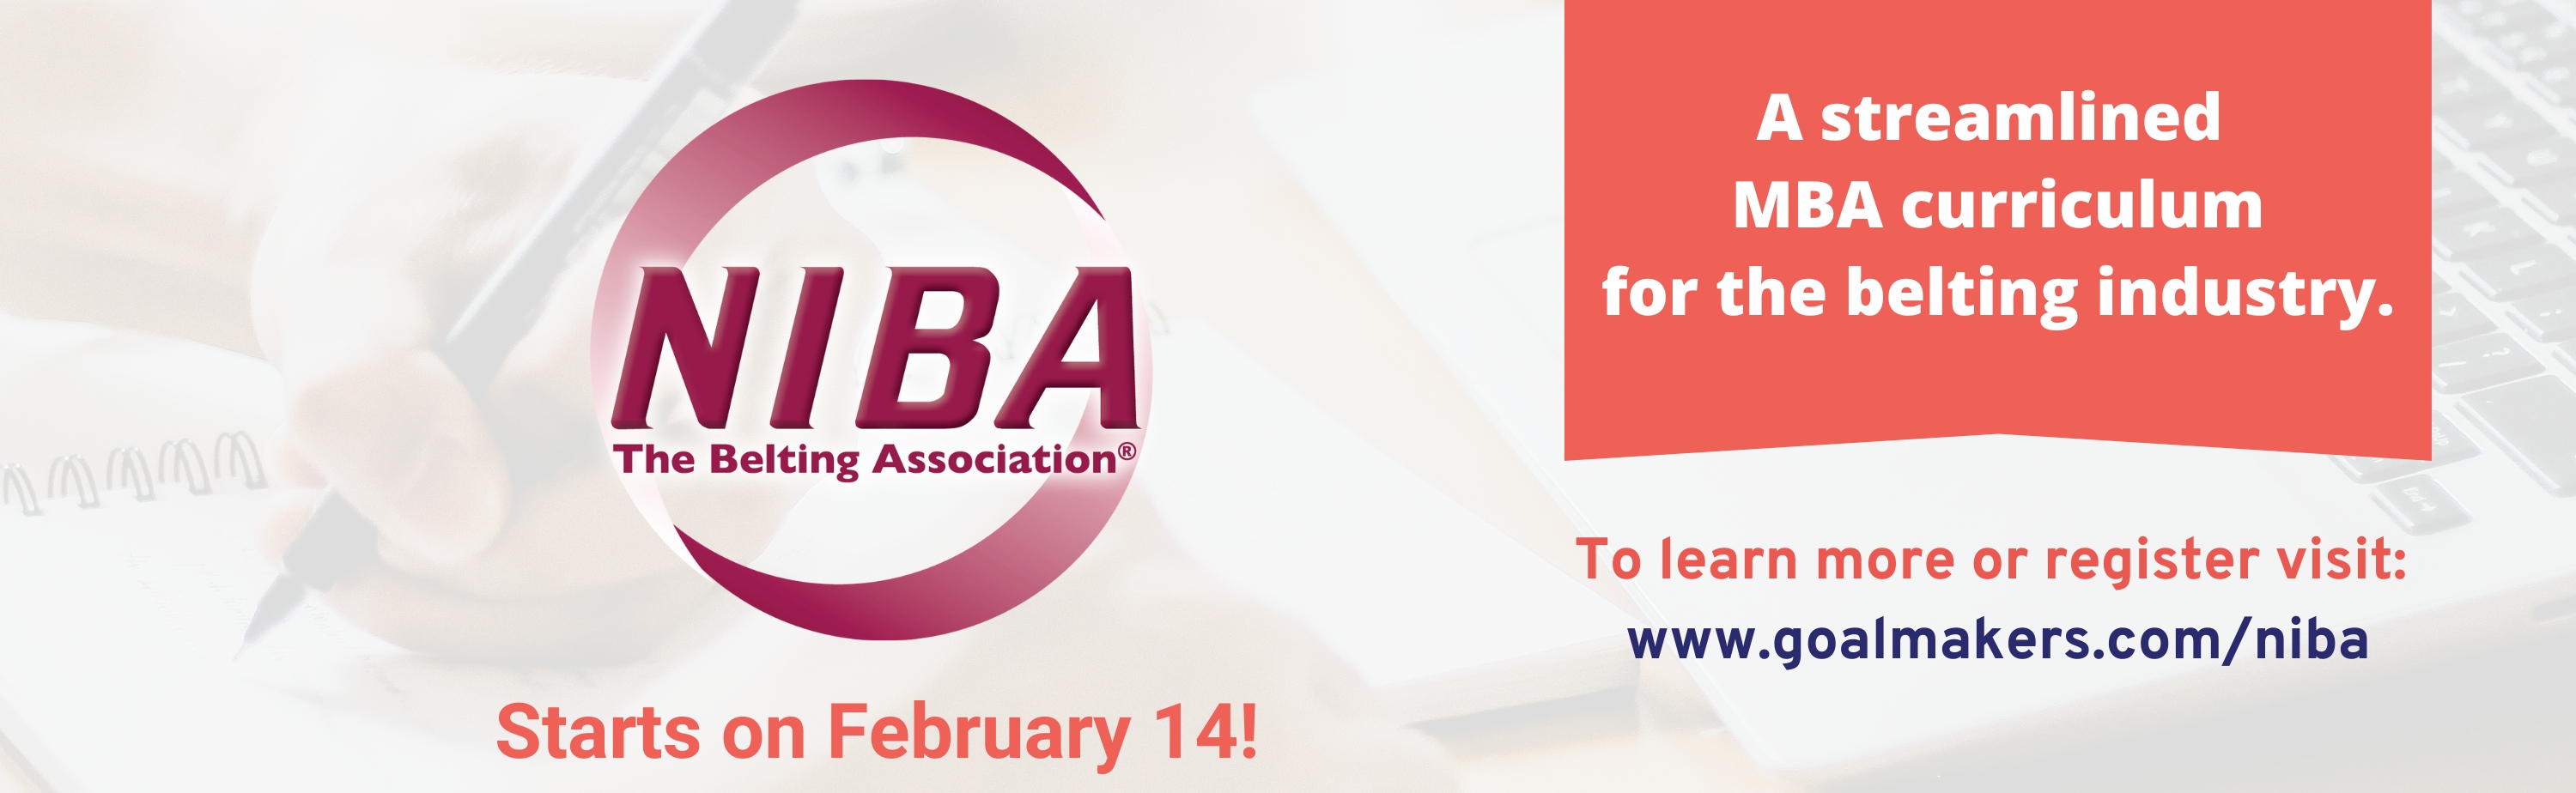 NIBA Newsletter and Web Banners (2)